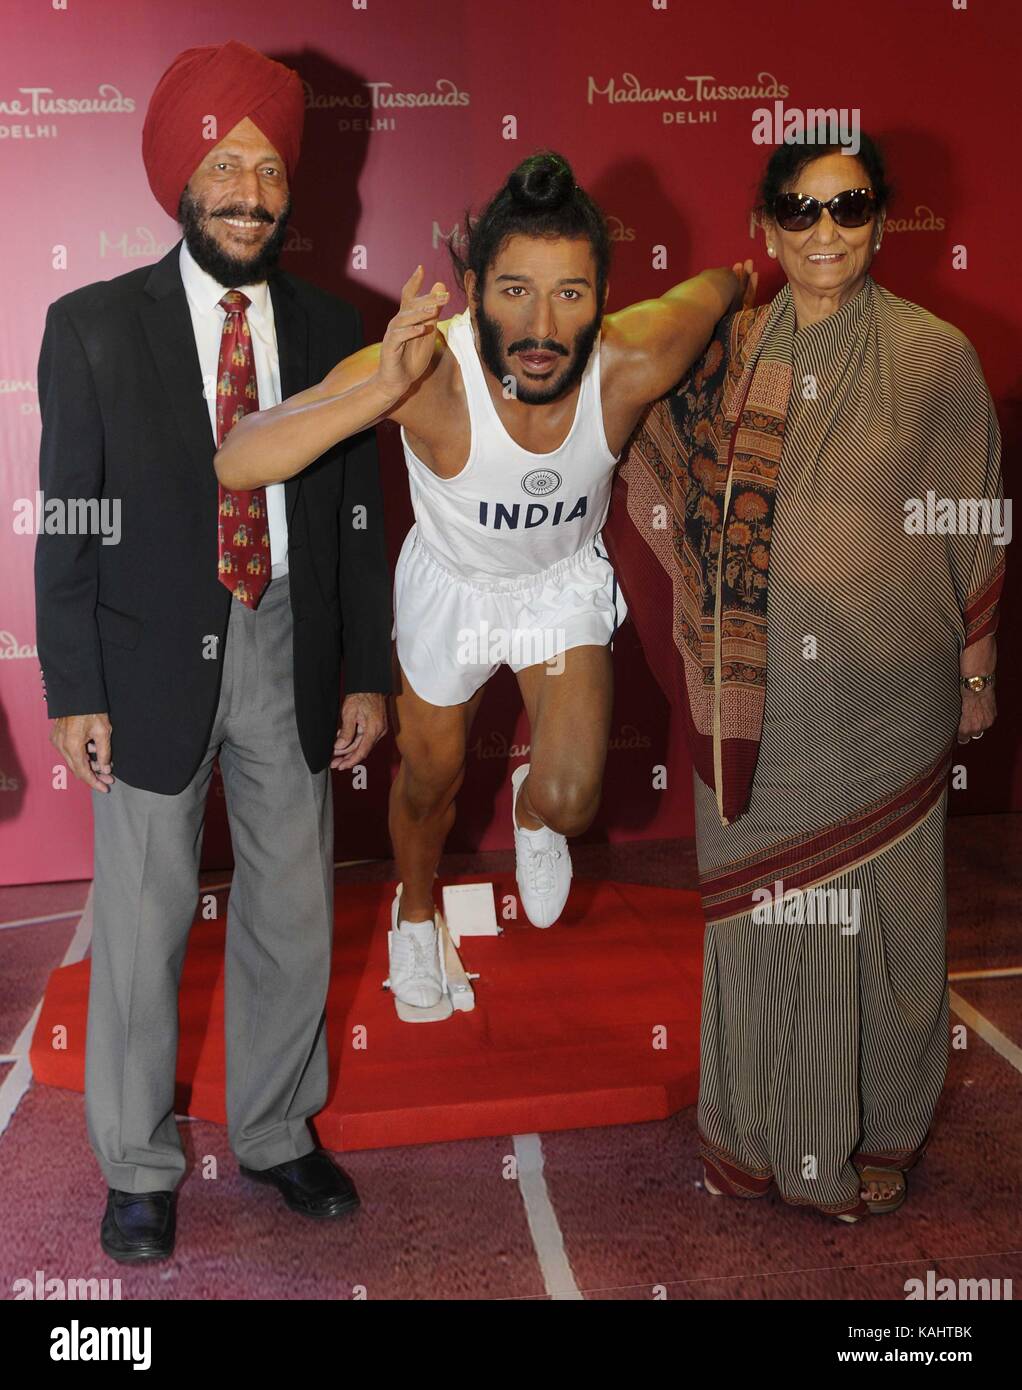 CHANDIGARH, INDIA - SEPTEMBER 26: Legendary athlete Milkha Singh with wife Nirmal Kaur unveiling his wax statue for Madame Tussauds museum on September 26, 2017 in Chandigarh, India. Milkha Singh was the country's first athlete to win gold in the Commonwealth Games (1958 Cardiff) and missed a medal at 1960 Rome Olympic medal by a whisker, finishing fourth in the 400m final. The wax statue of Milkha Singh will share space with Mahatma Gandhi, Prime Minister Narendra Modi, Kapil Dev and Amitabh Bachchan and international celebrities such as Michael Jackson at the Madame Tussauds Delhi museum whi Stock Photo